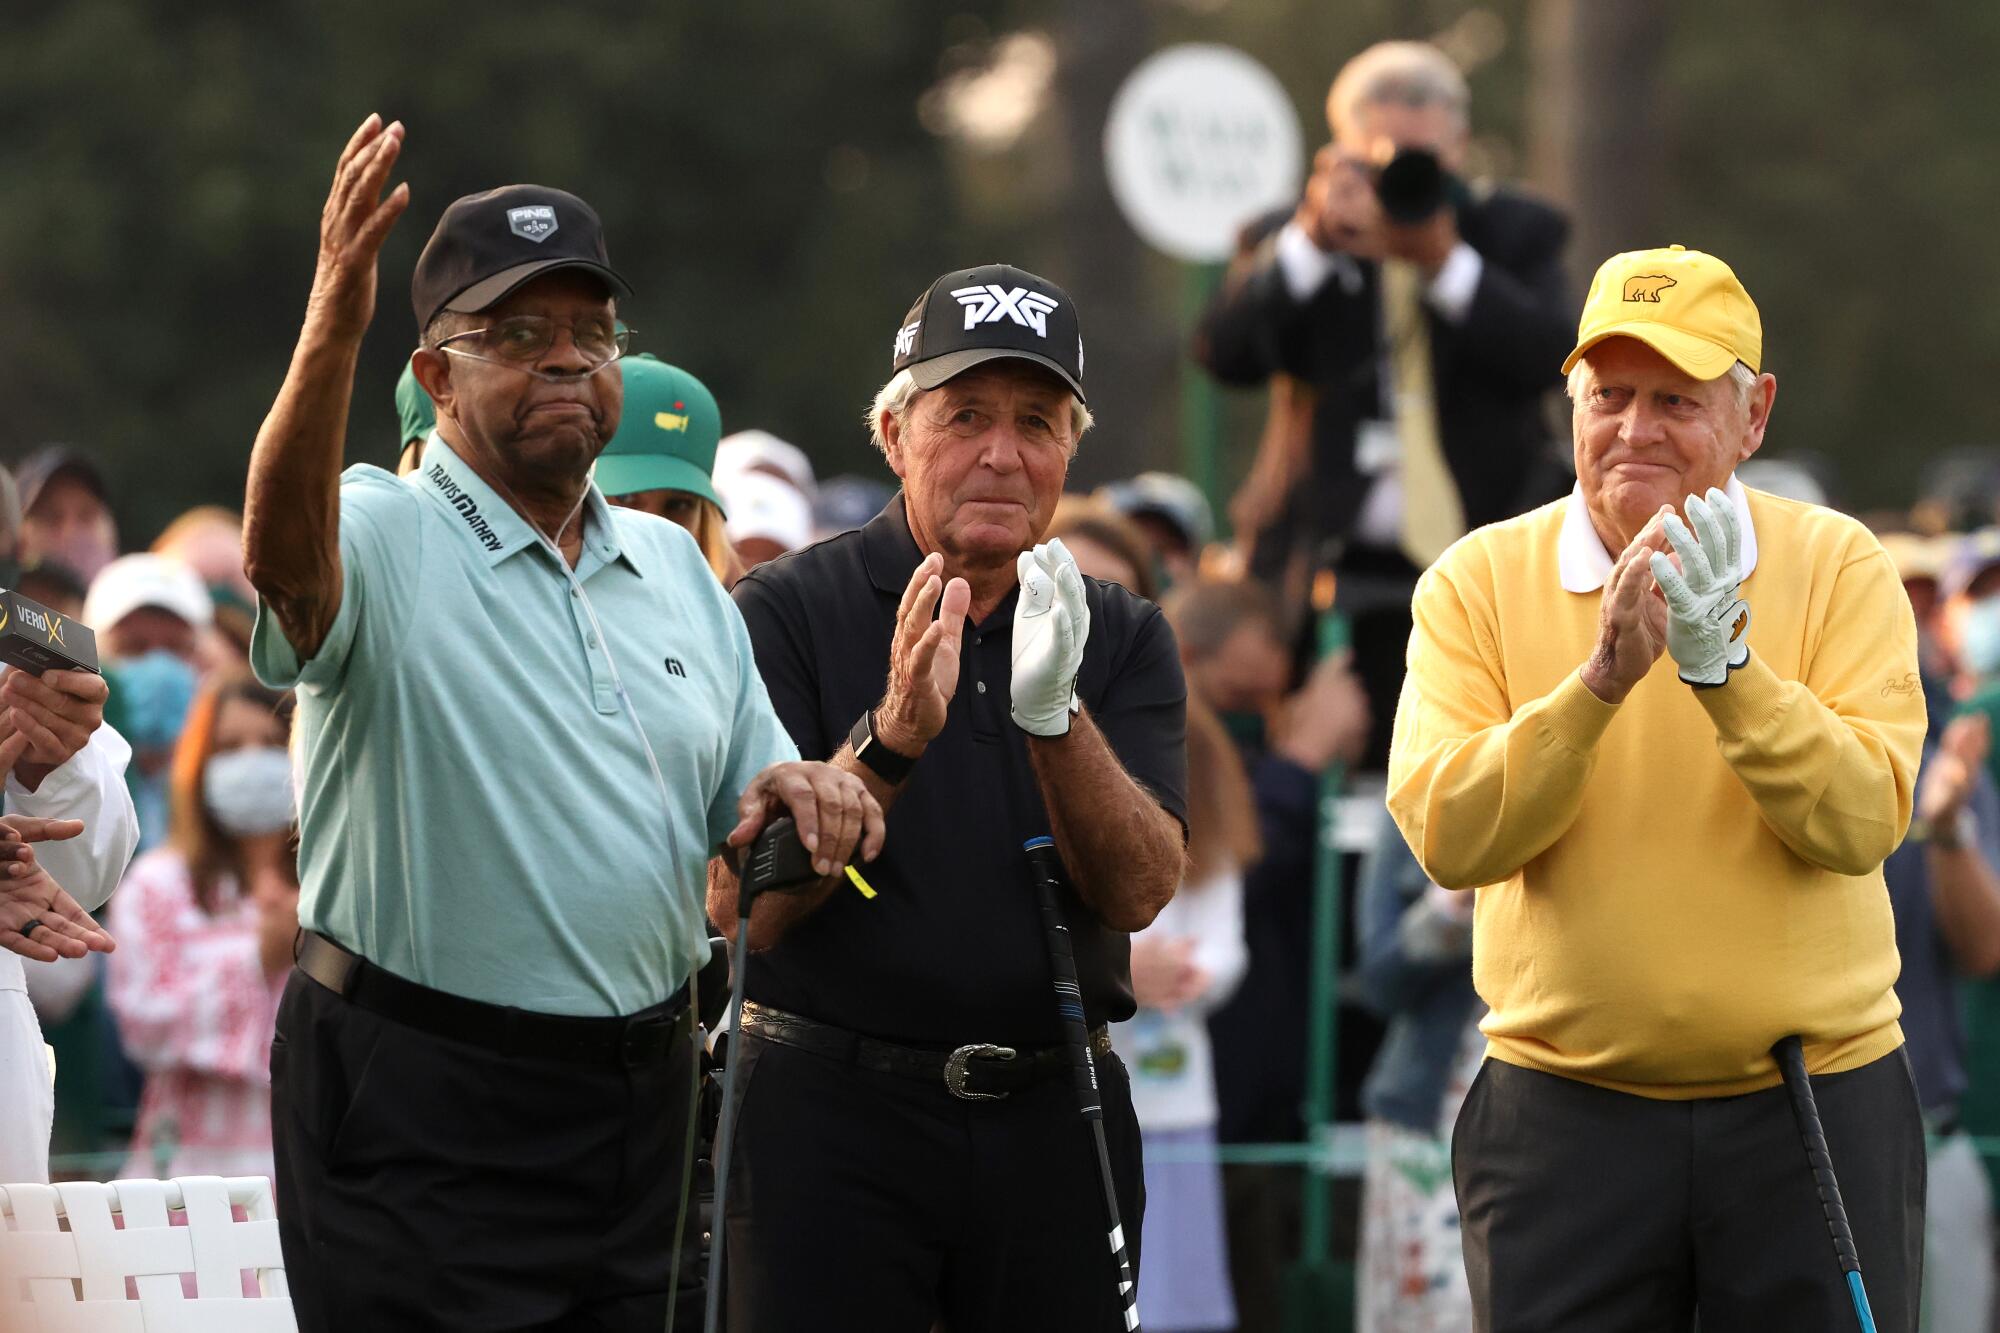 Honorary starter Lee Elder waves to the patrons alongside Gary Player and Jack Nicklaus.